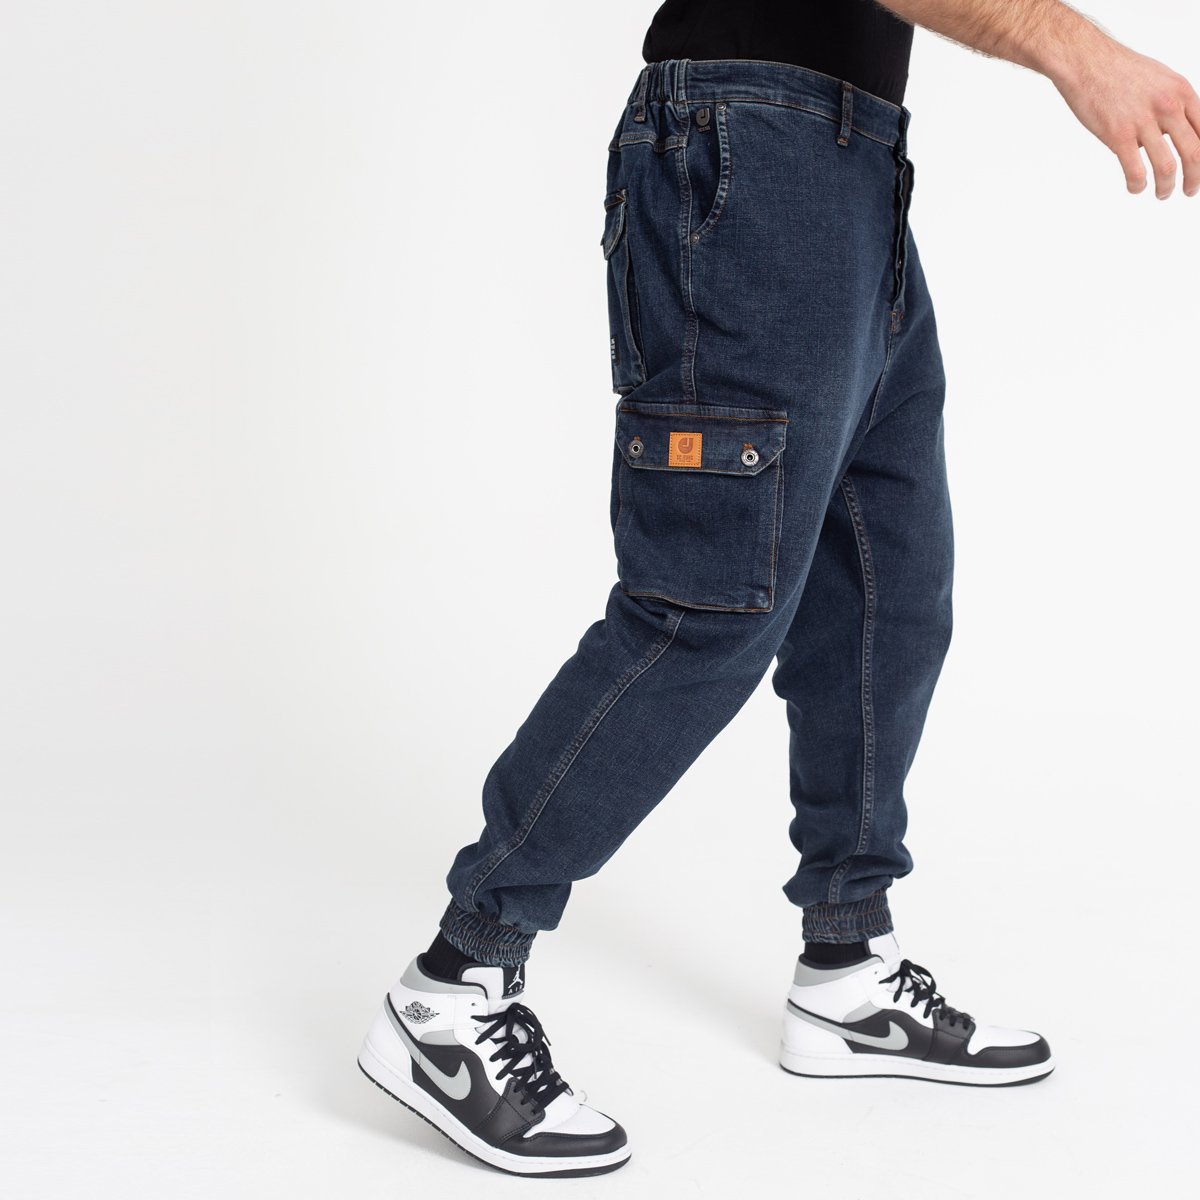 Dirty Jeans Cargo Pants - DCjeans saroual and clothing